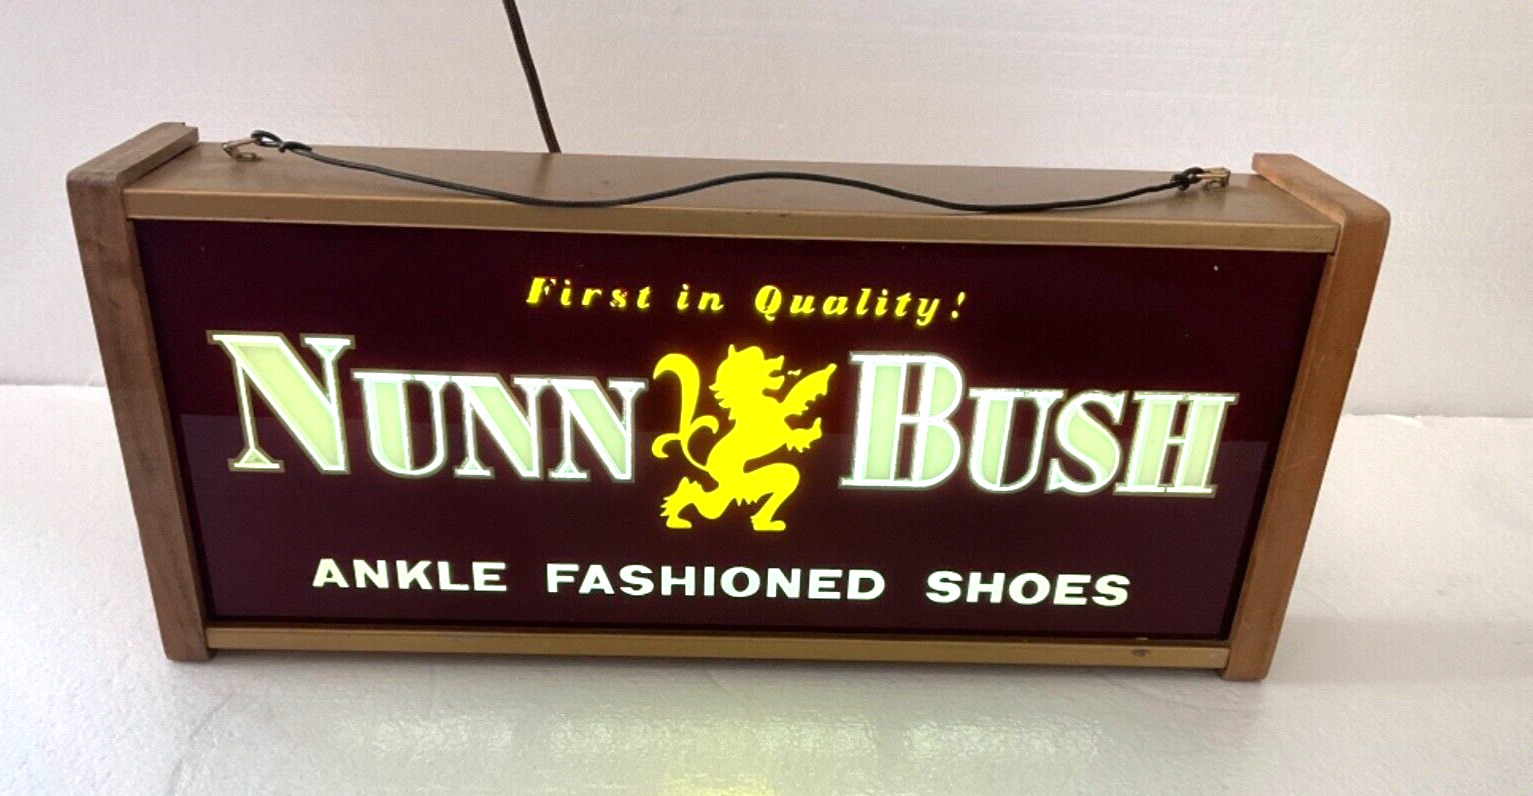 VINTAGE 1940-1950’s NUNN BUSH SHOES LIGHTUP ADVERTISING SIGN - WORKS GREAT -RARE